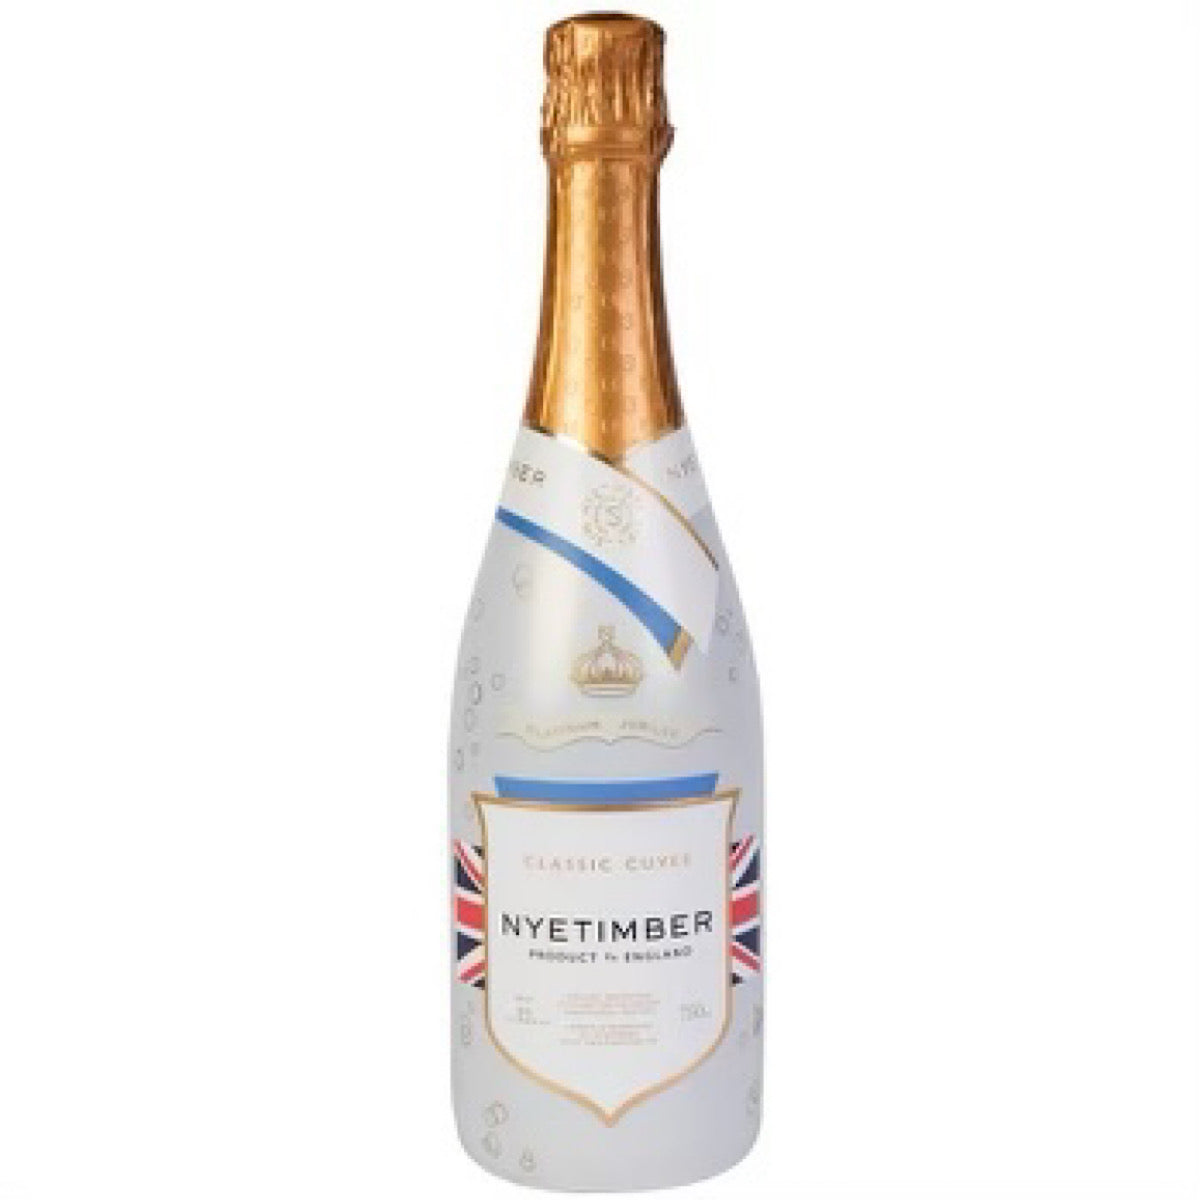 Nyetimber Classic Cuvee Jubilee Edition 6 Bottle Case 75cl